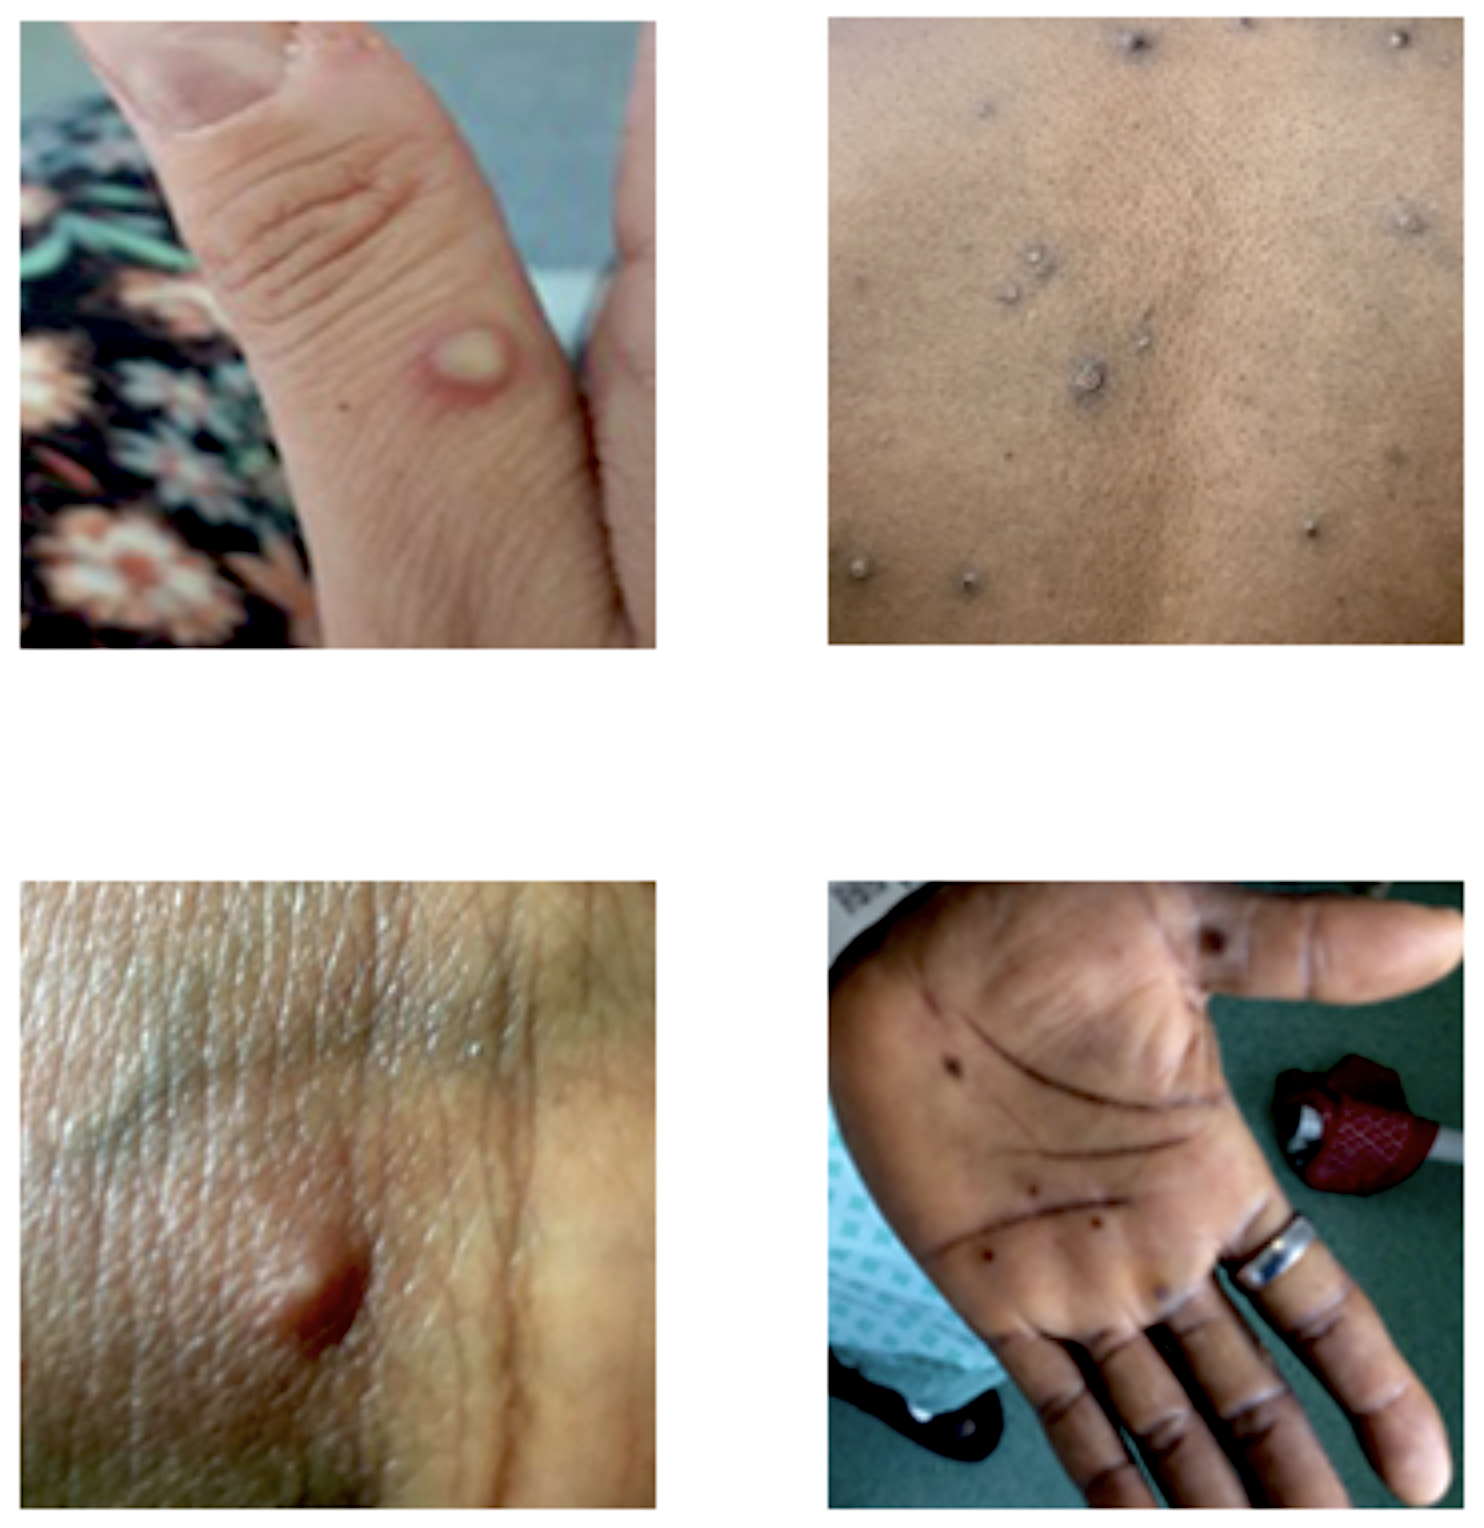 Four examples of Mpox rashes from the National Health Services of England